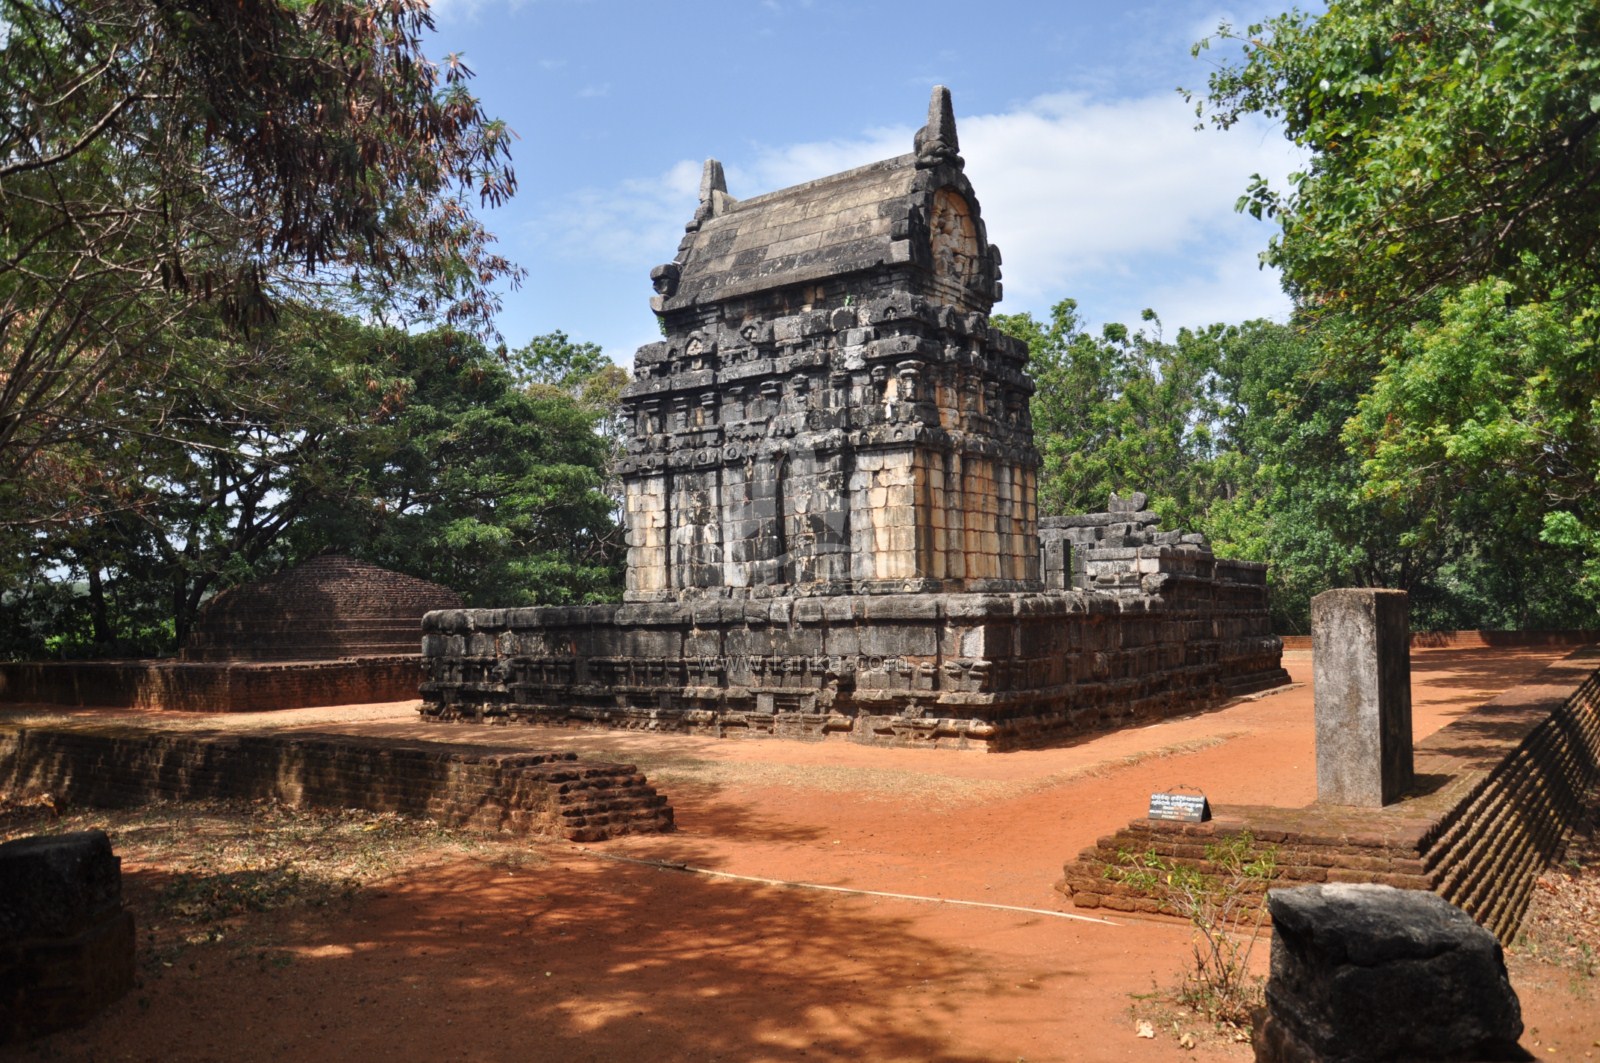 an ancient temple surrounded by trees in a forested area